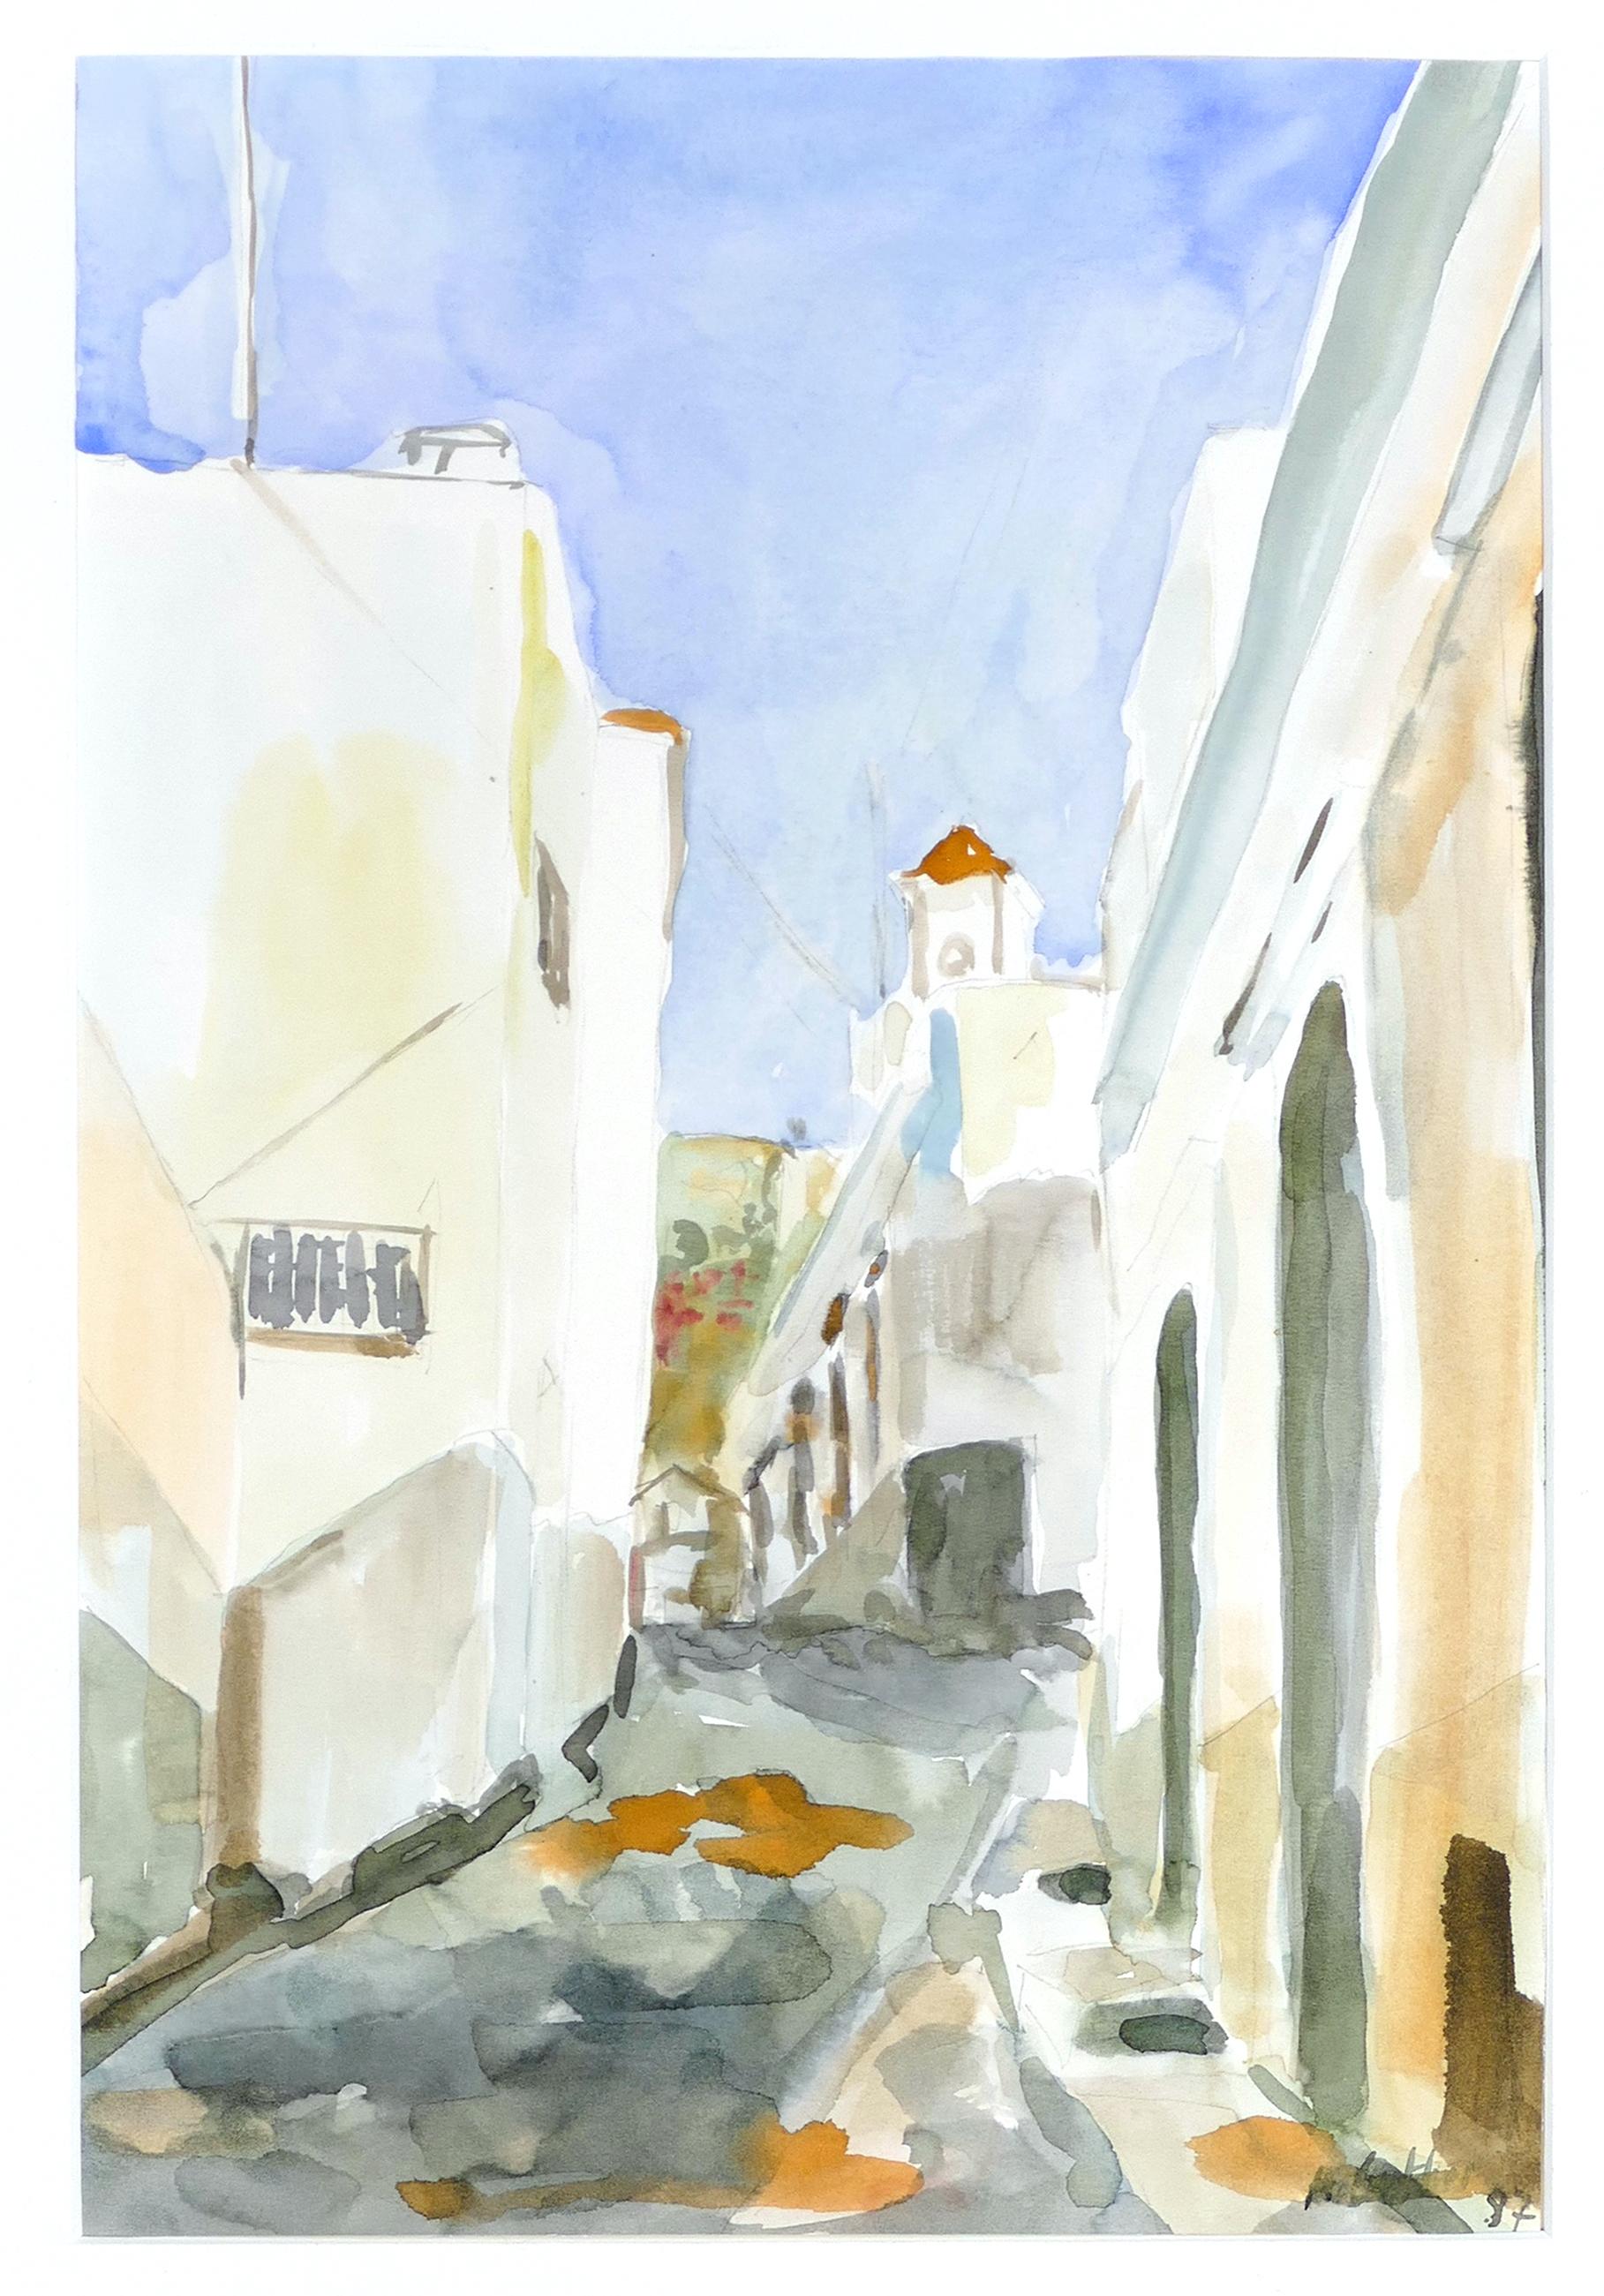 A Summer Road is an original colored watercolor realized in 1997 by Armin Guther.

Good conditions. Includes passepartout (50 x 60 cm).

The artwork is hand-signed and dated on the lower right corner. 

This beautiful watercolor represents a glimpse